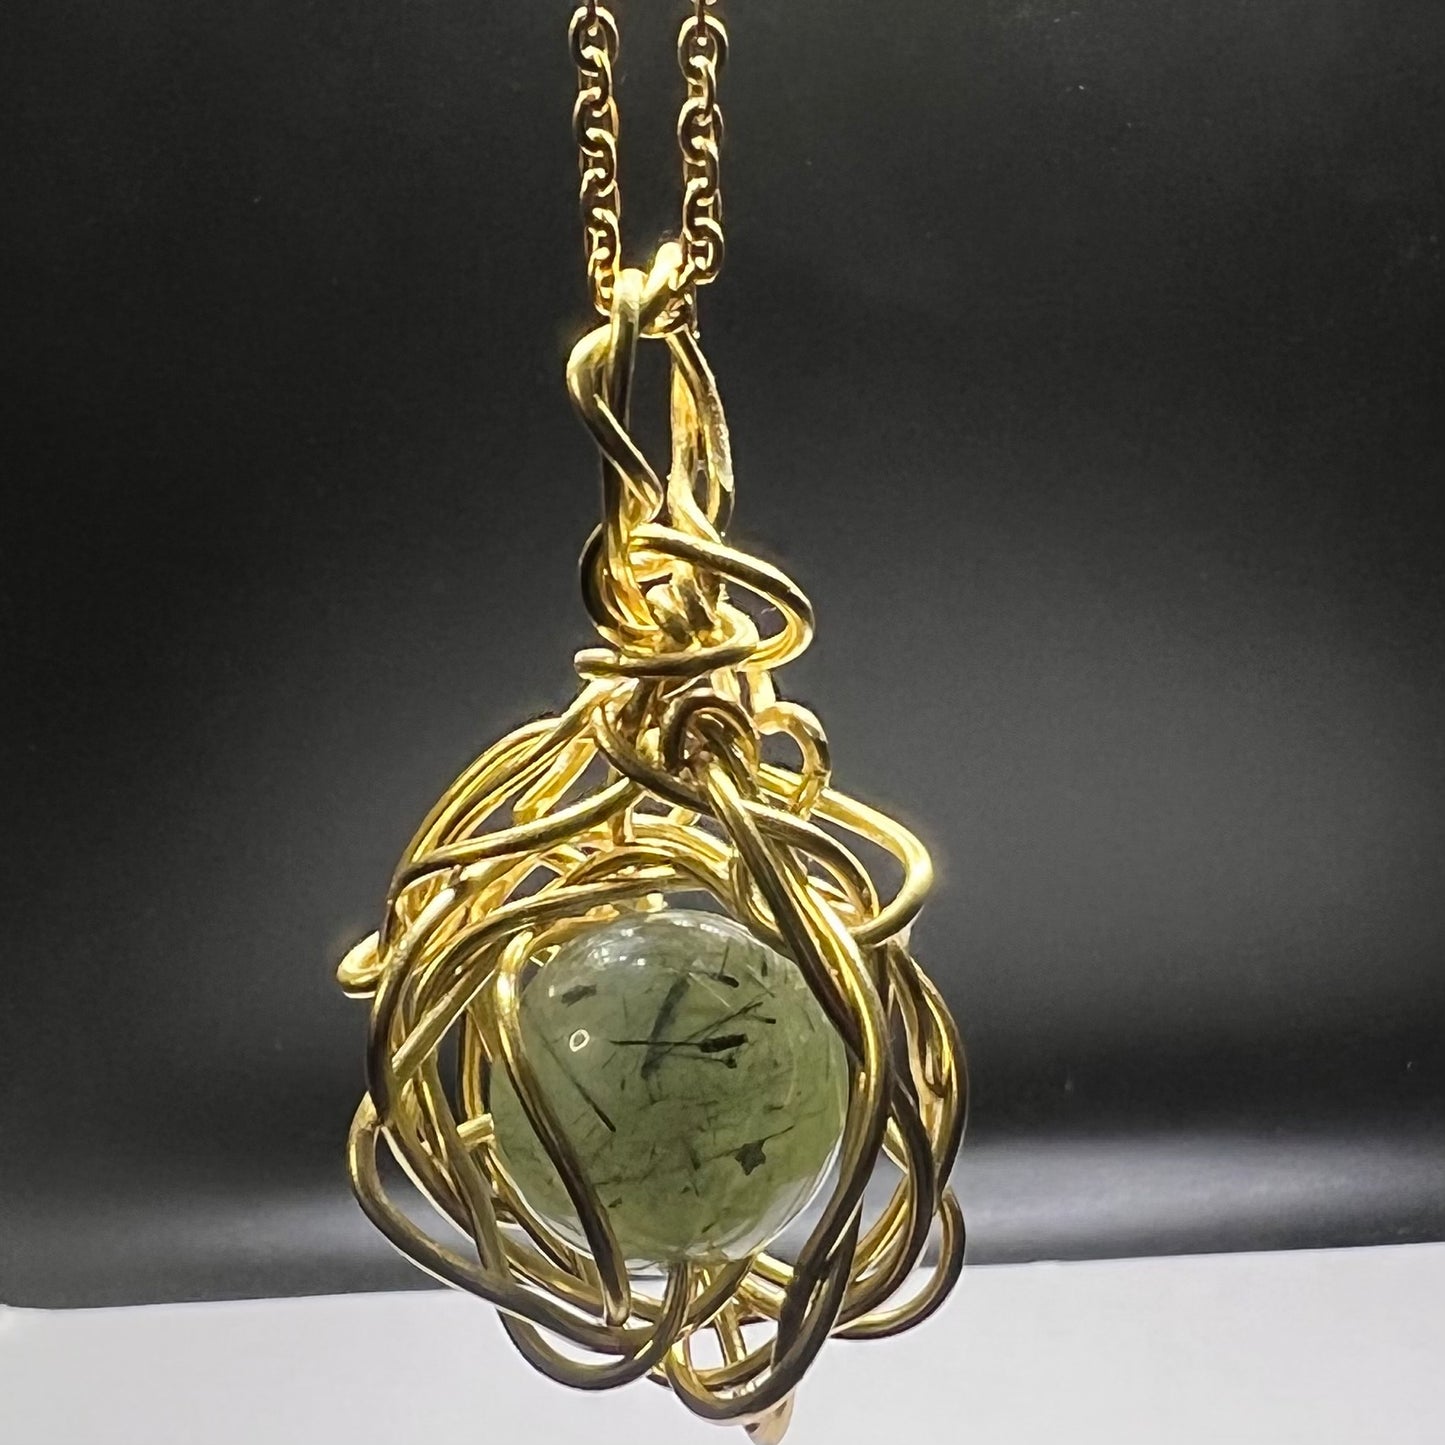 Prehnite-"stone of dreaming" it is believed to increase the power of the dream state